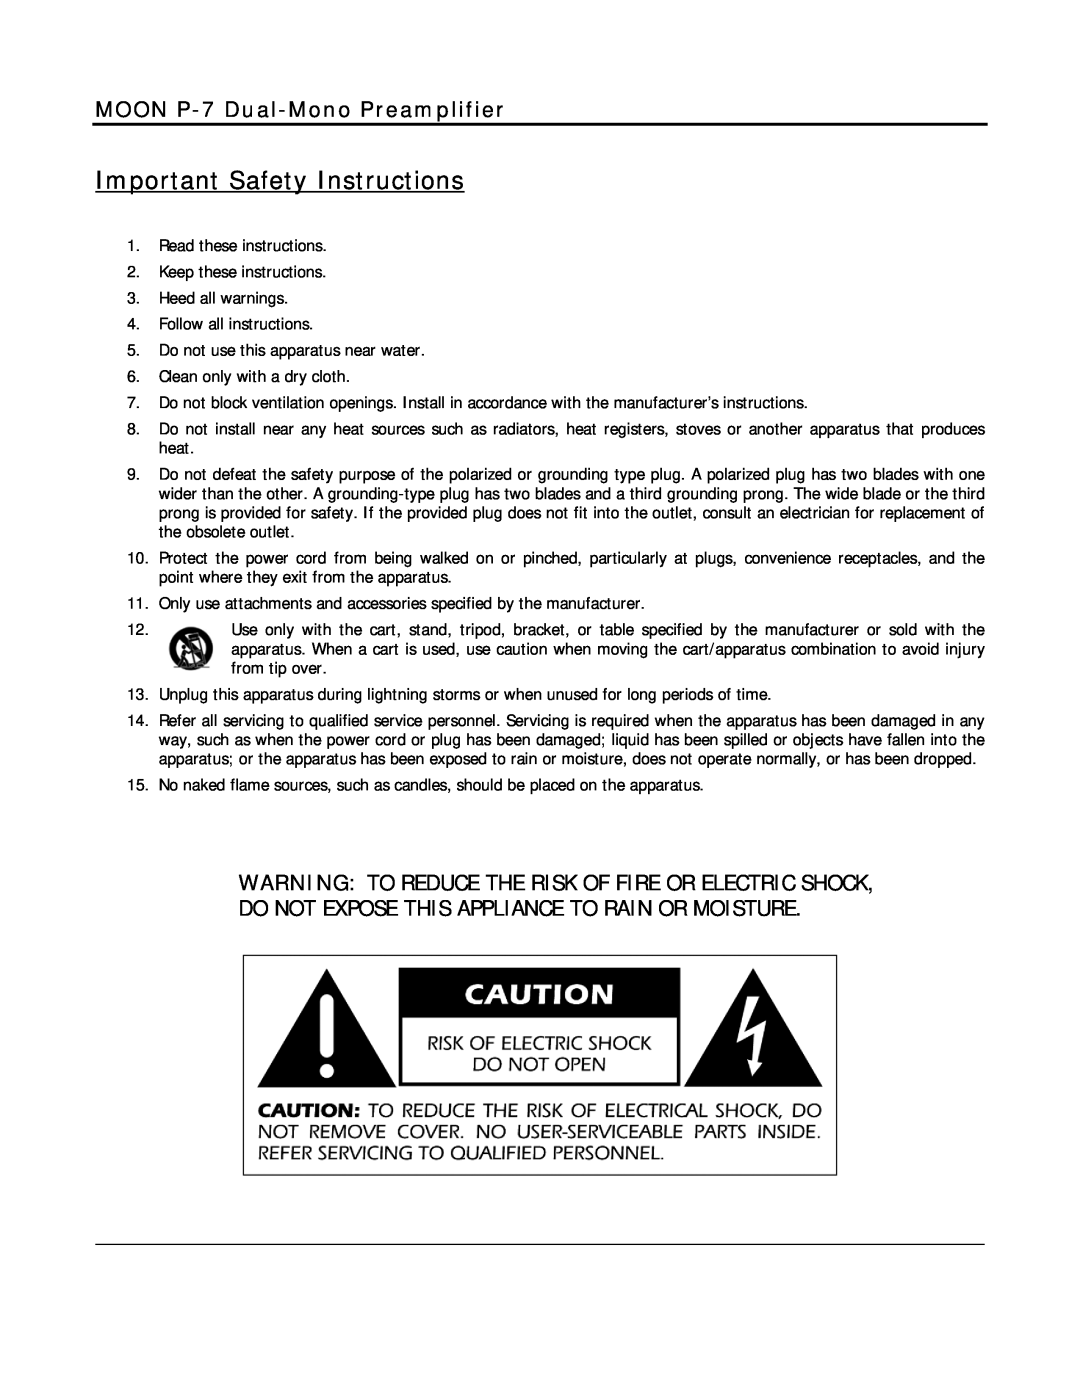 Simaudio owner manual Important Safety Instructions, MOON P-7 Dual-MonoPreamplifier 